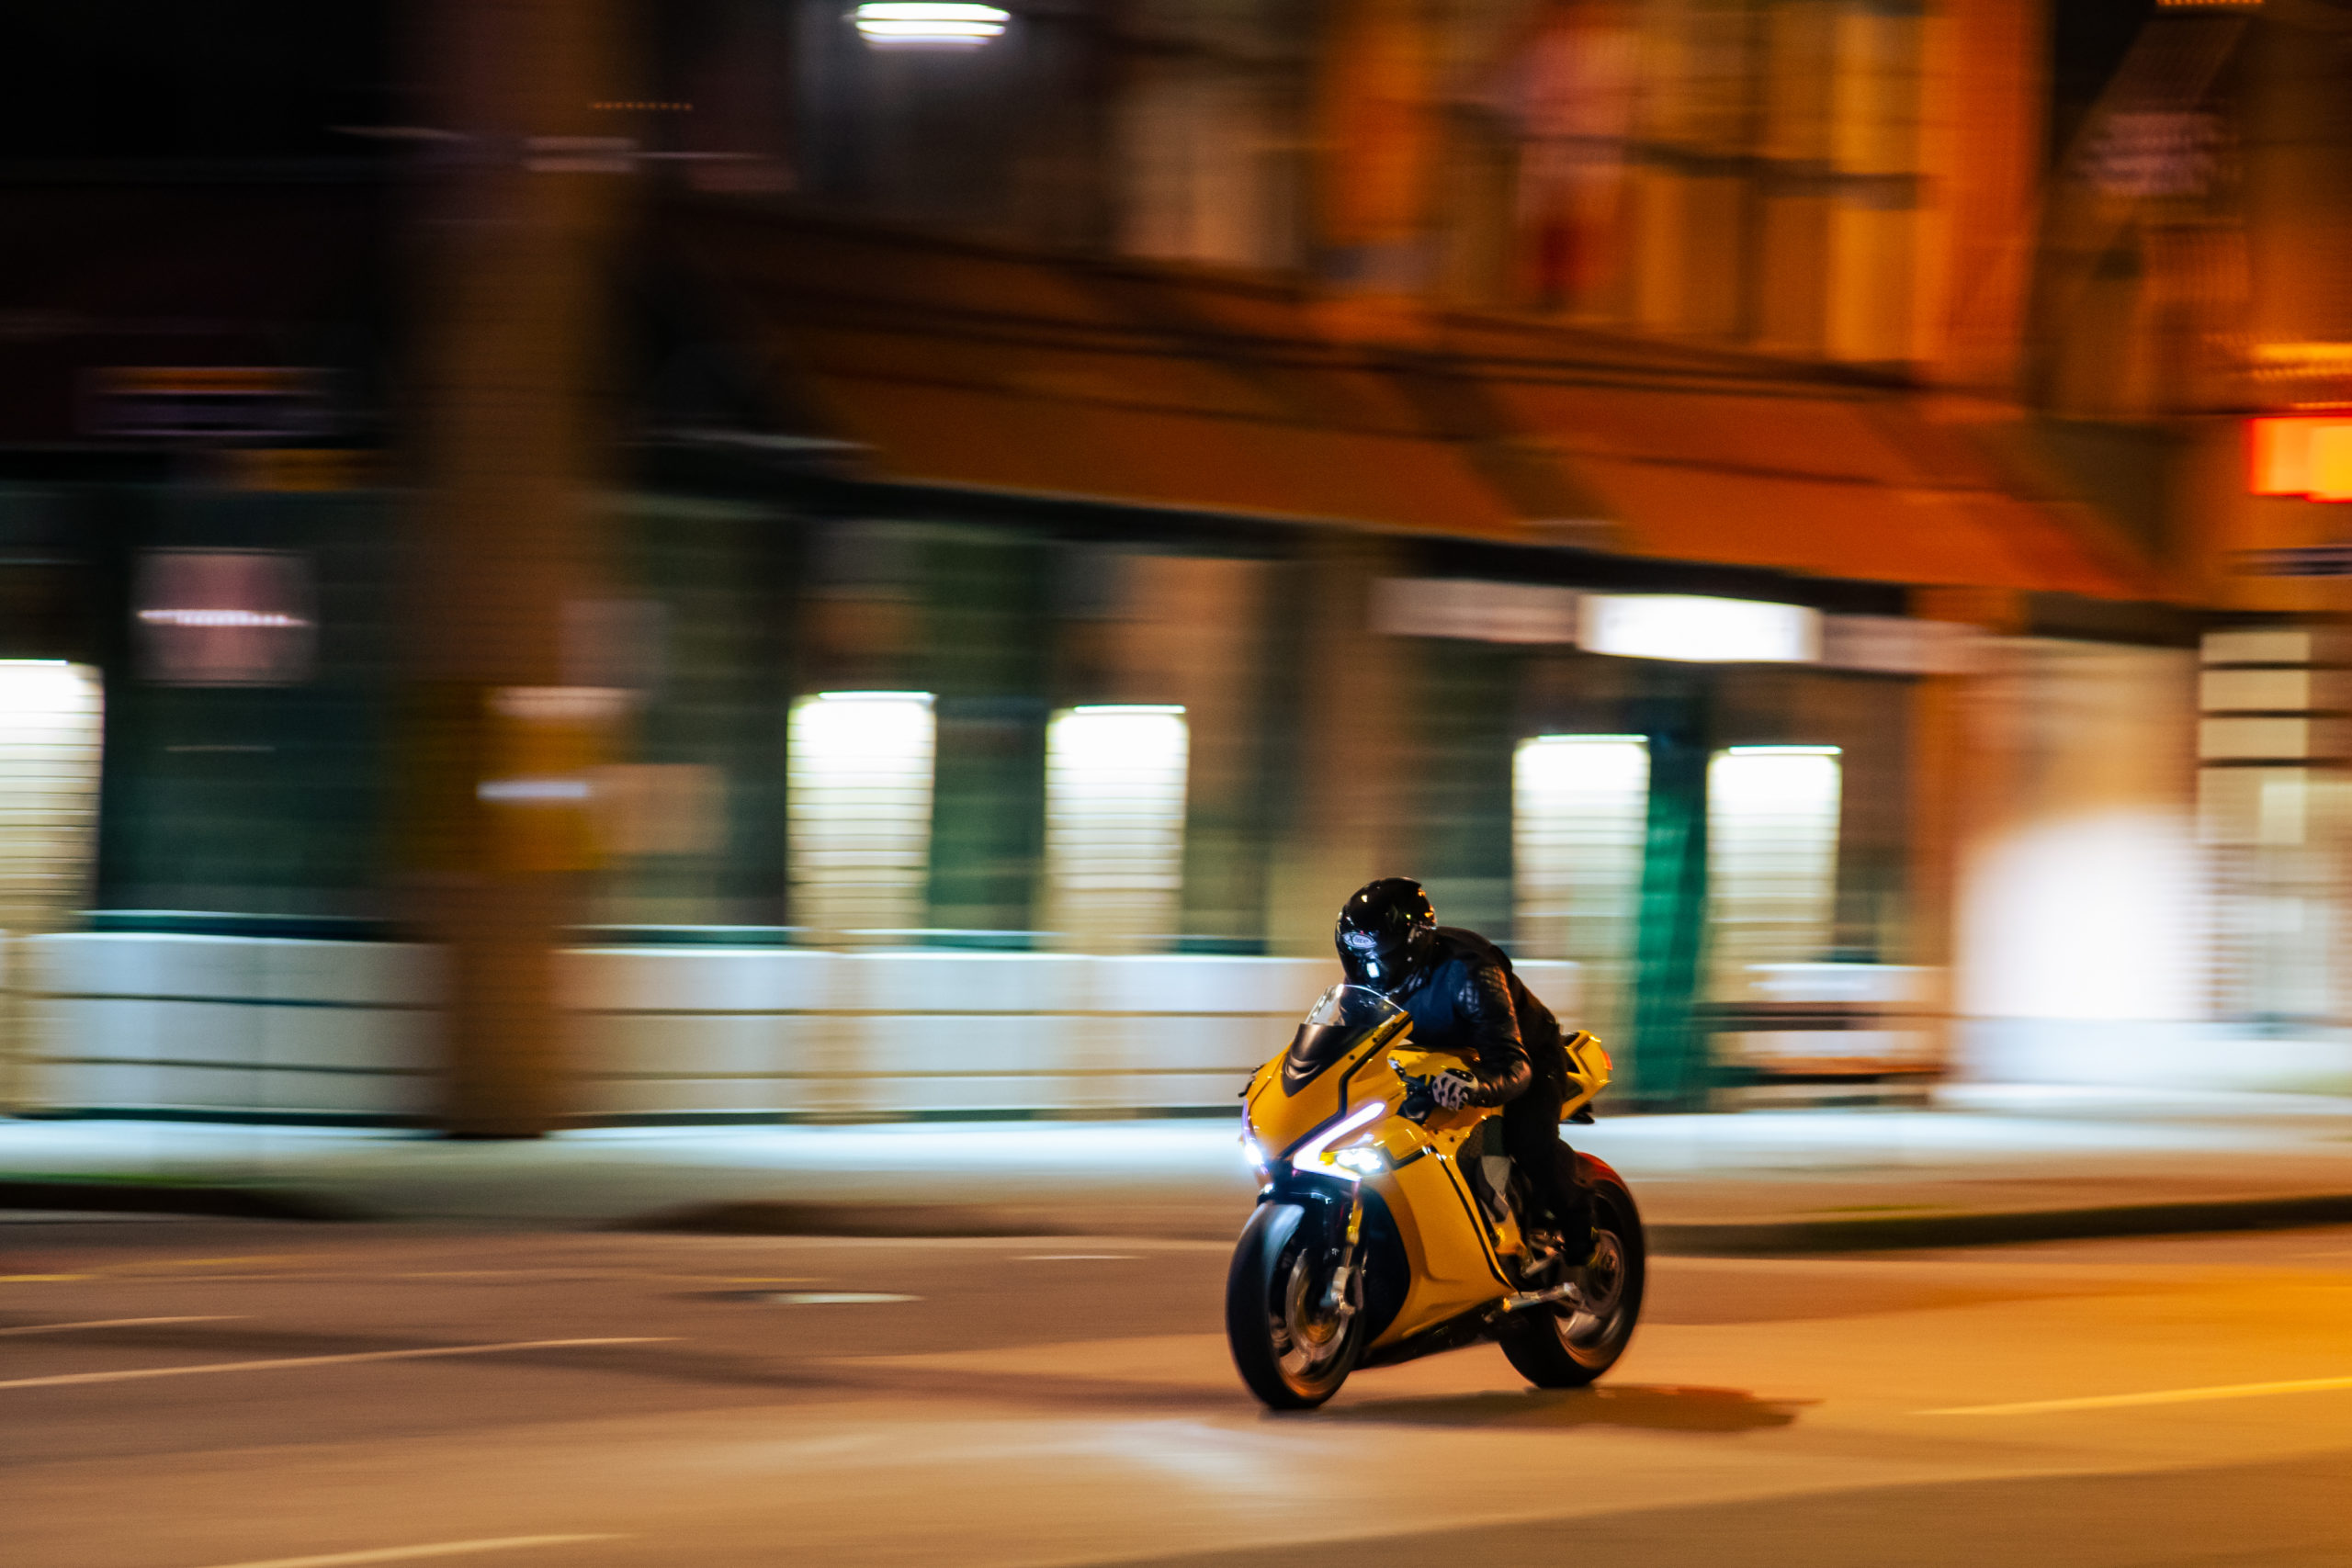 A night-scene of a rider trying out the Damon Hypersport